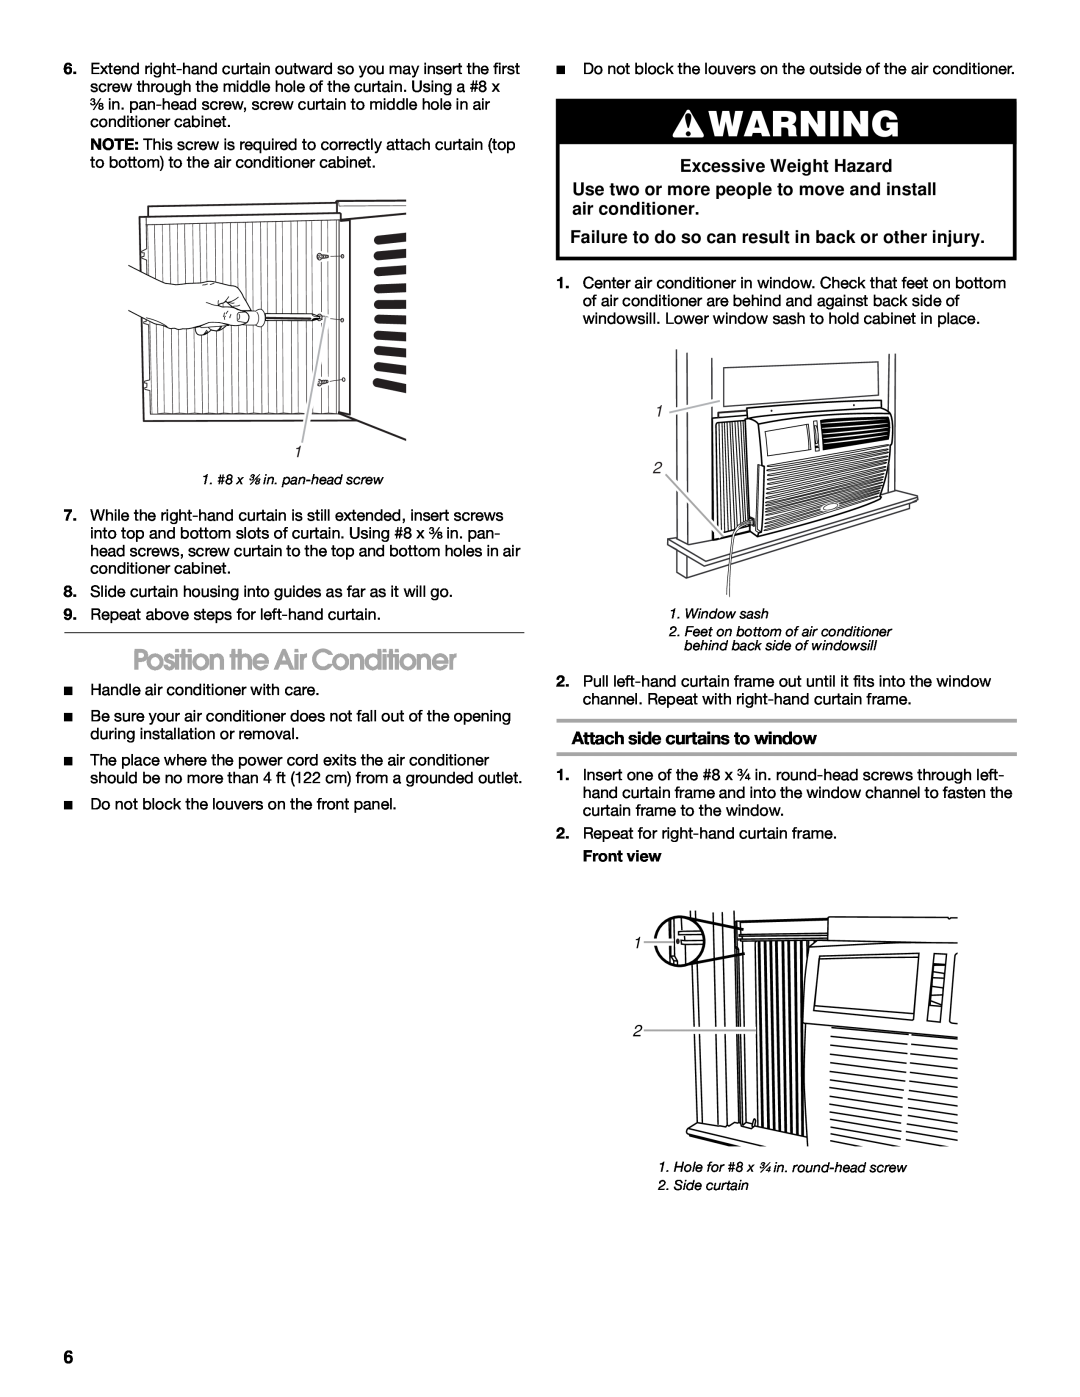 Whirlpool CA10WXP0 manual Position the Air Conditioner, Attach side curtains to window, Excessive Weight Hazard 